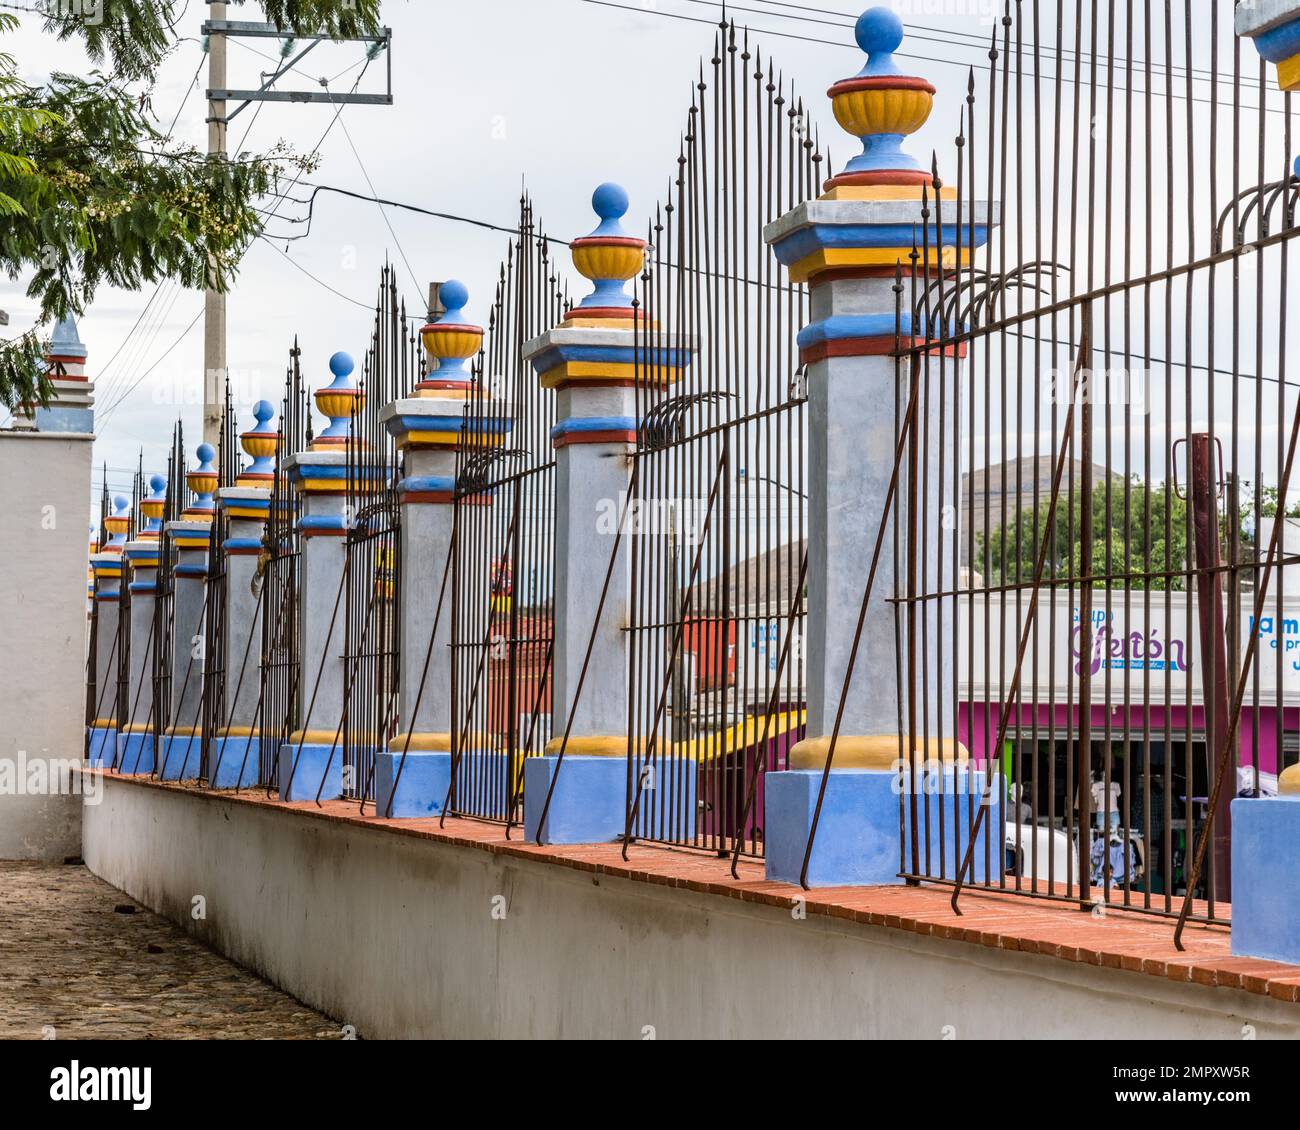 The wrought iron fence and colorful pillars in front of the Church of Santo Domingo in Ocotlan de Morelos, Oaxaca, Mexico. Stock Photo